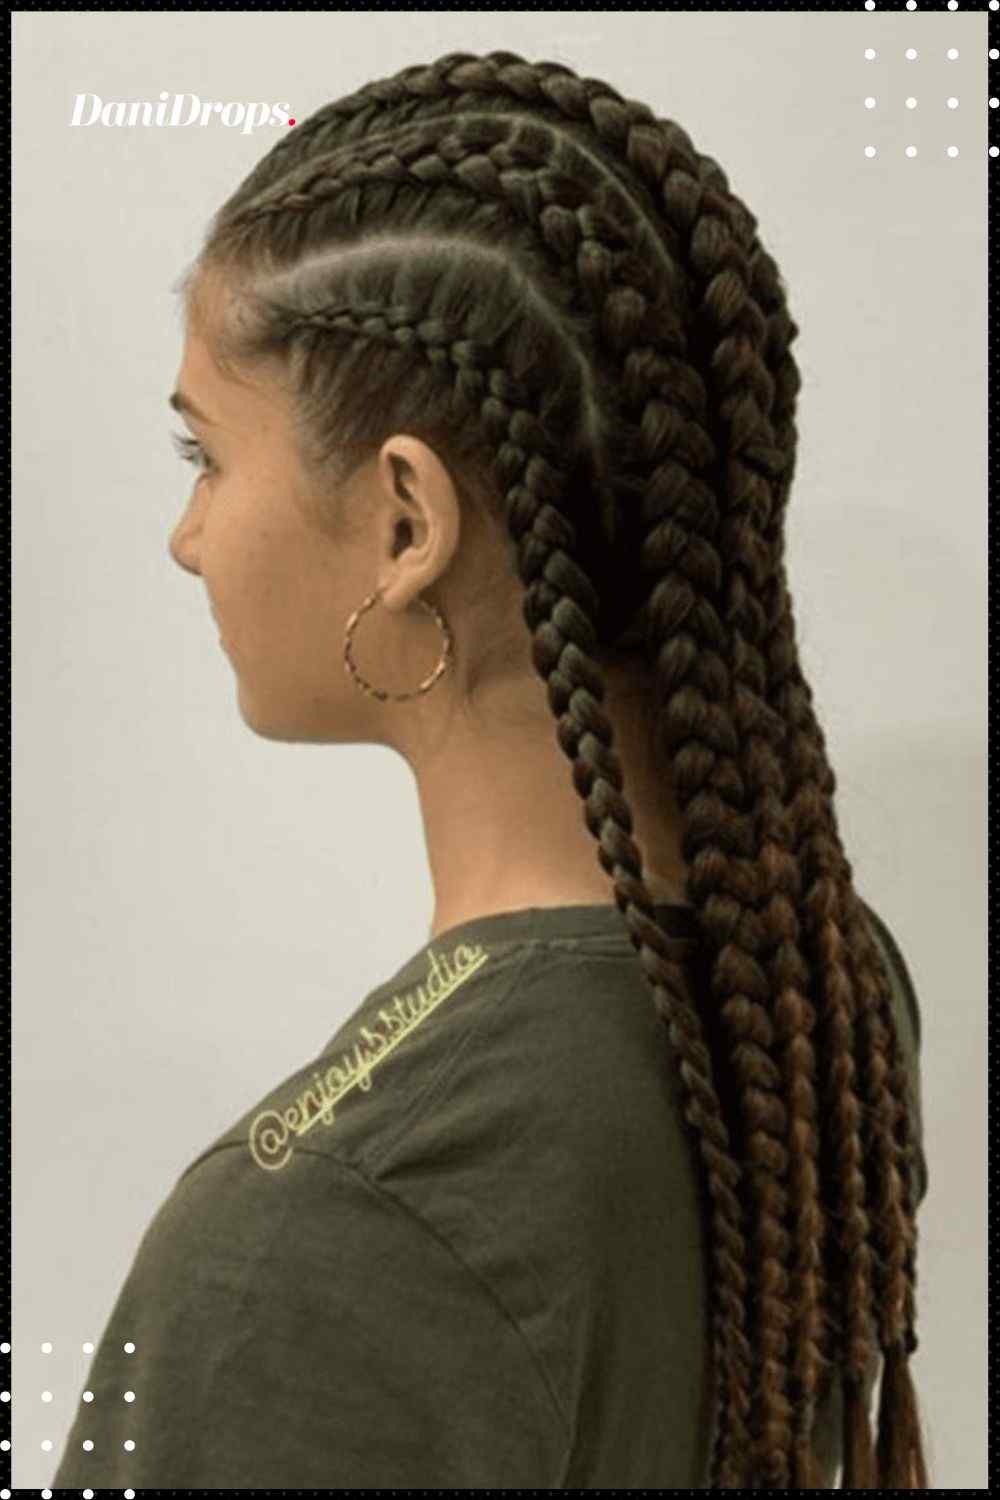 Nagô Braids - The perfect hairstyle for curly hair